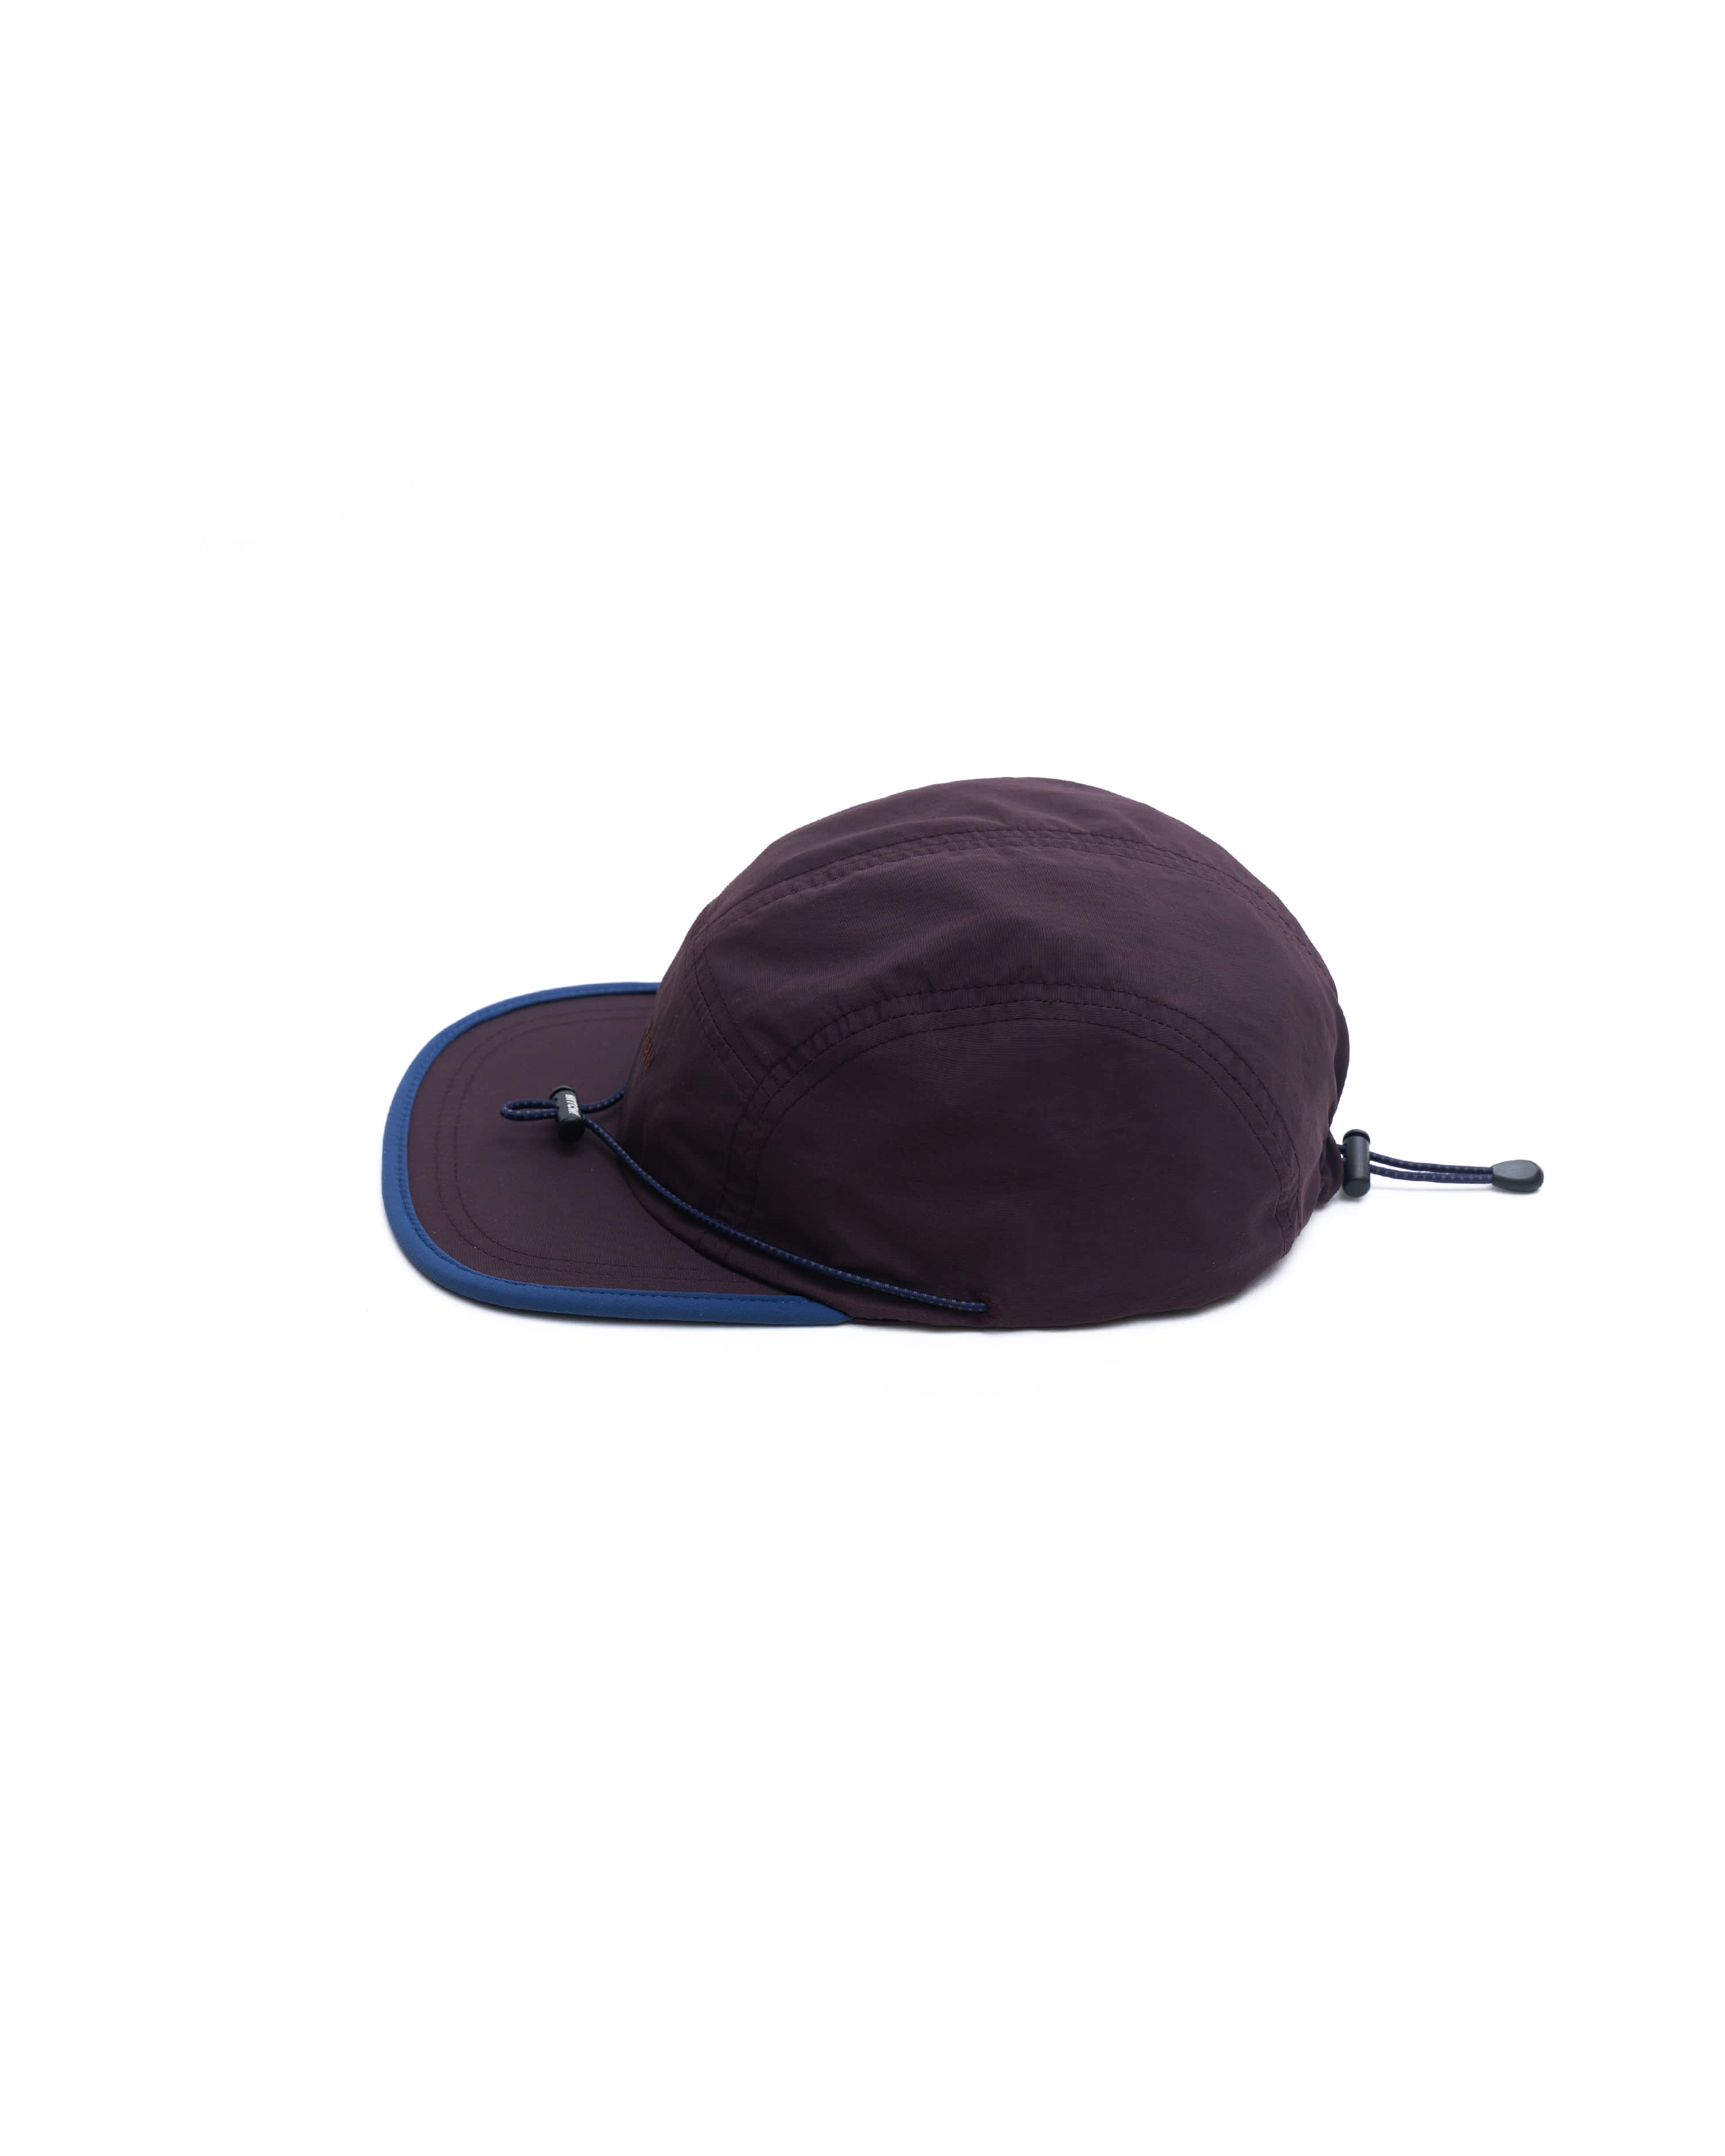 [out of stock] Camp 1 - Burgundy